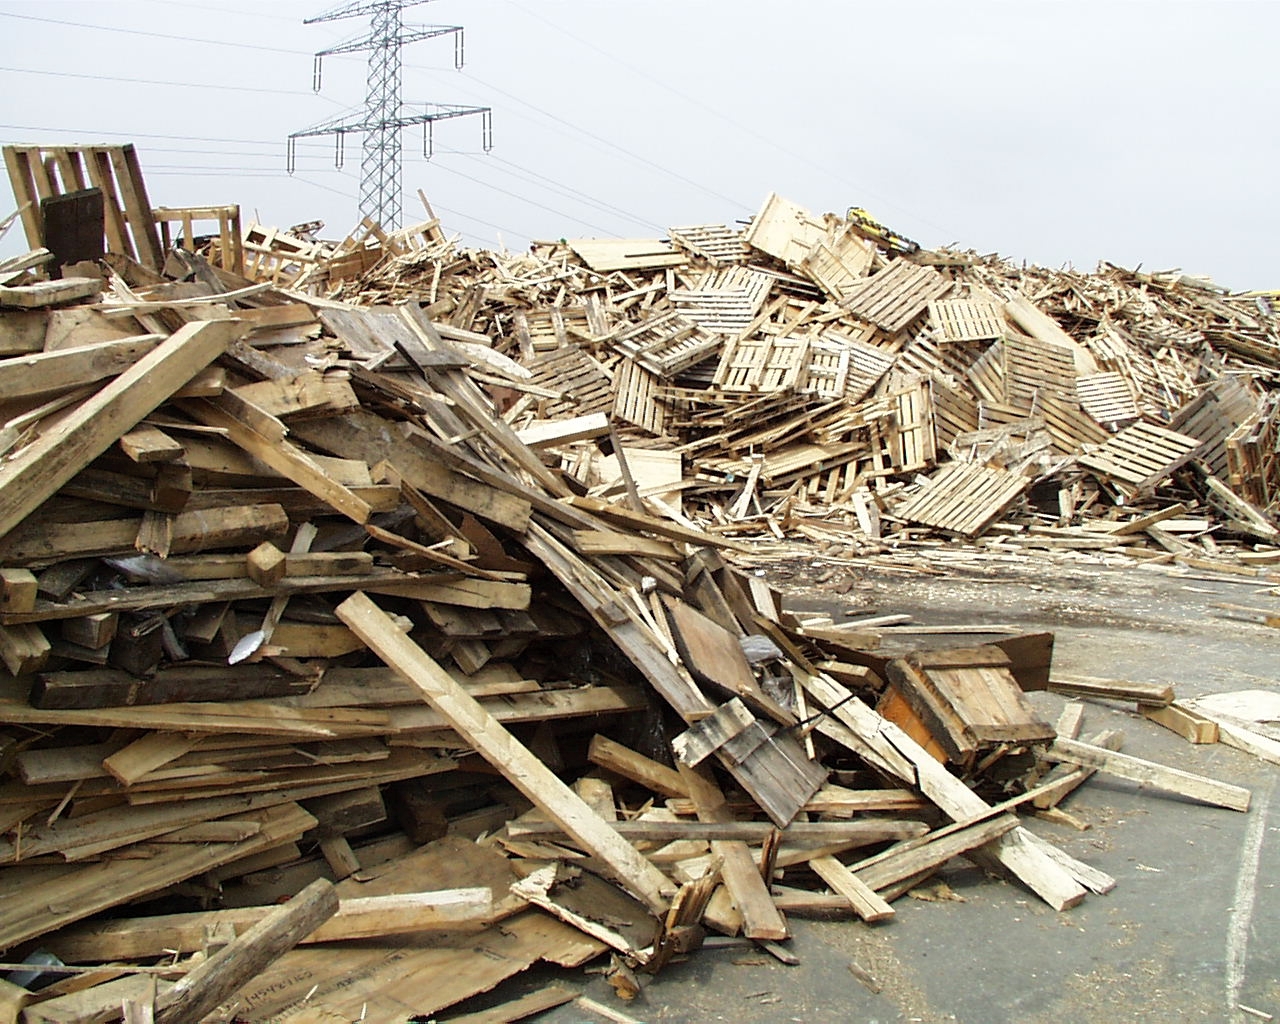 The photo shows large heaps of old wooden boards, wooden pallets and other wood products at a recycling yard.